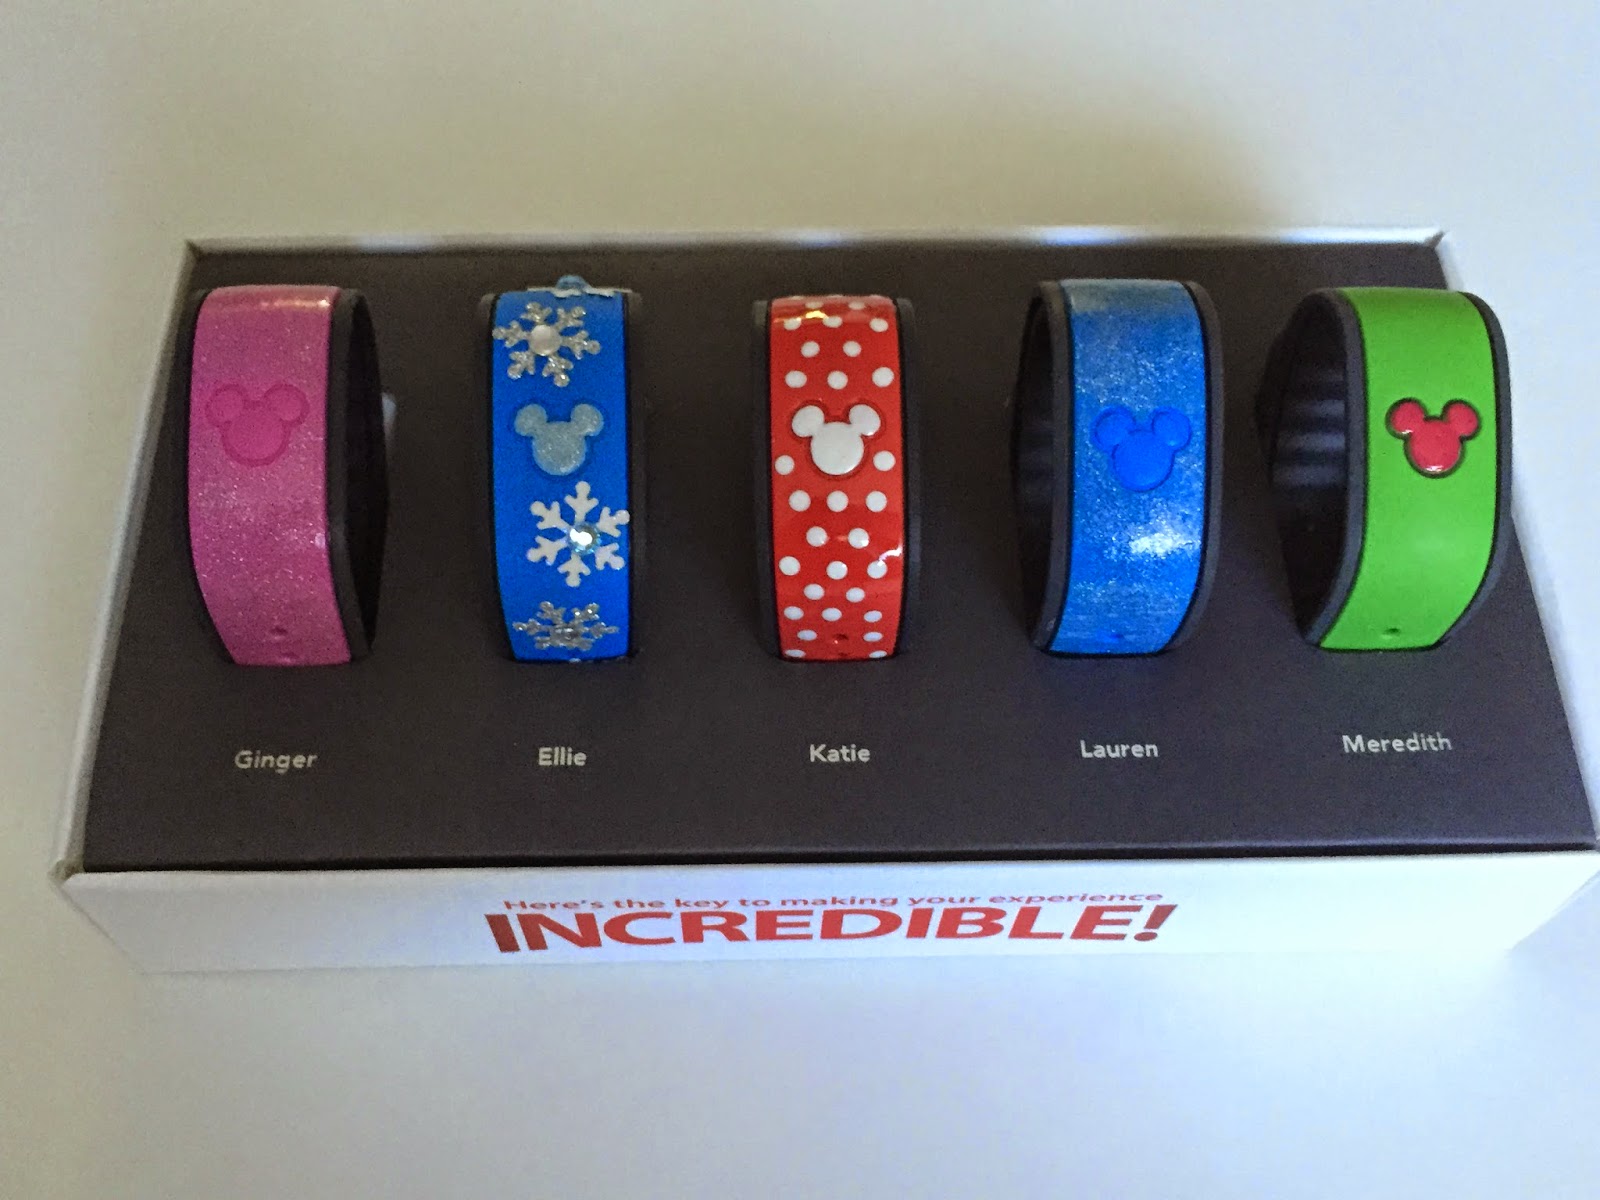 DIY Decorated MagicBands - A Wonderful Thought